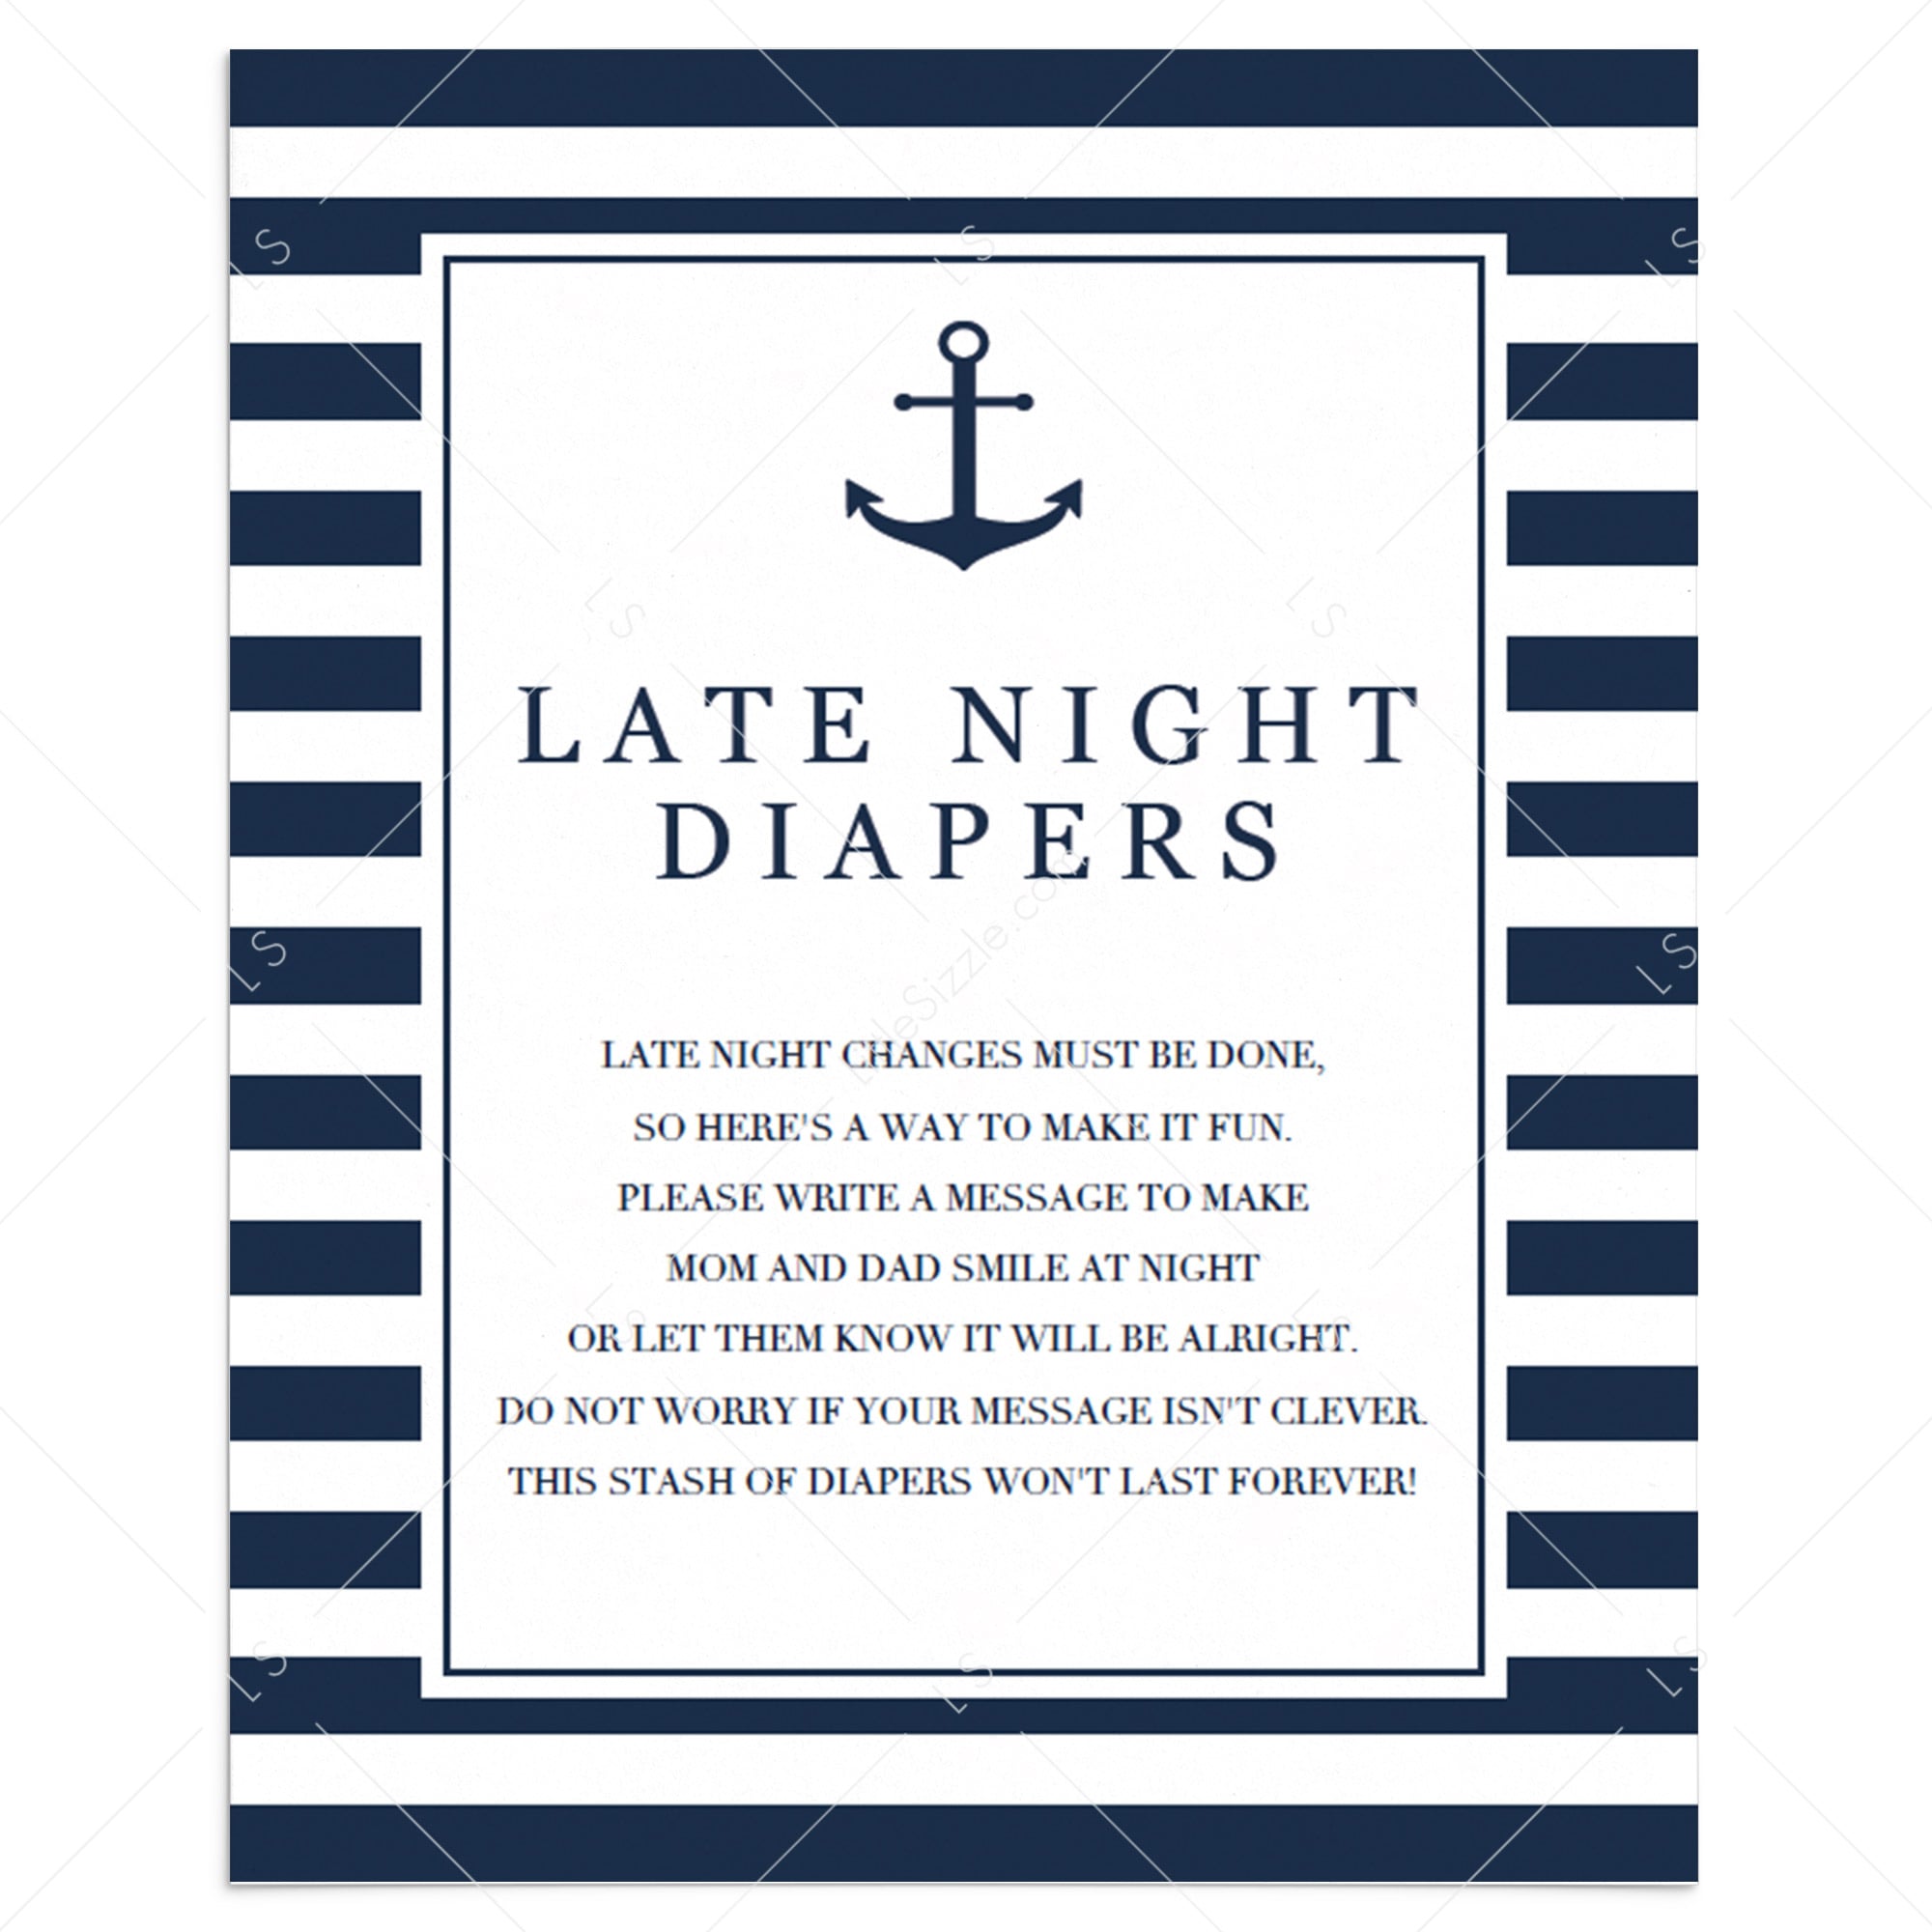 Late night diaper game for nautical baby shower printable by LittleSizzle